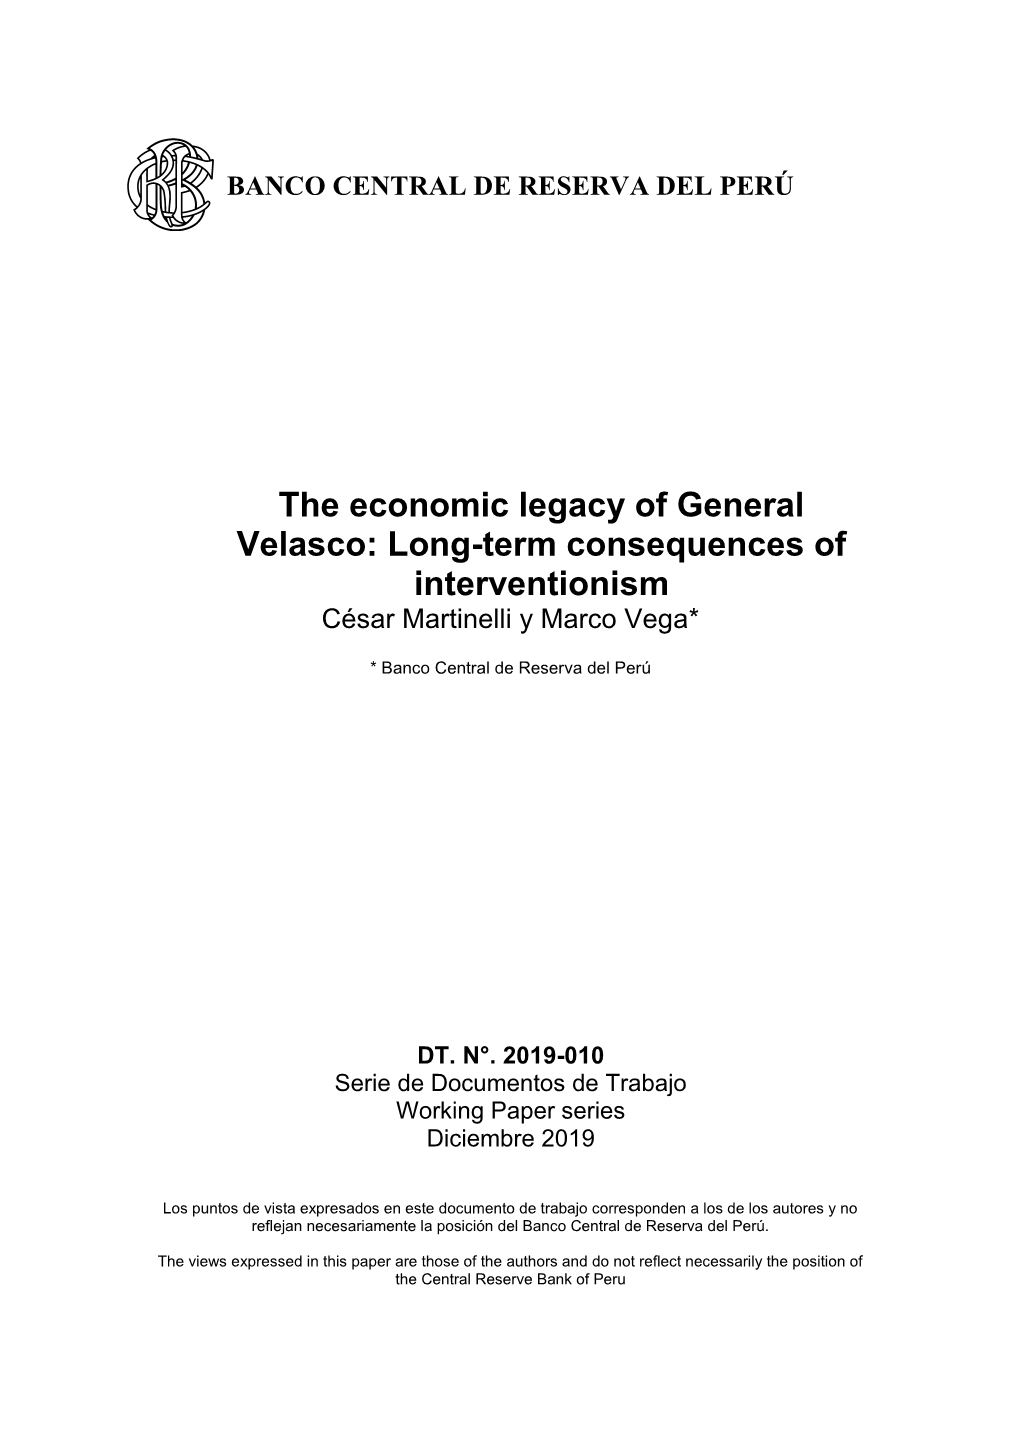 The Economic Legacy of General Velasco: Long-Term Consequences of Interventionism César Martinelli Y Marco Vega*